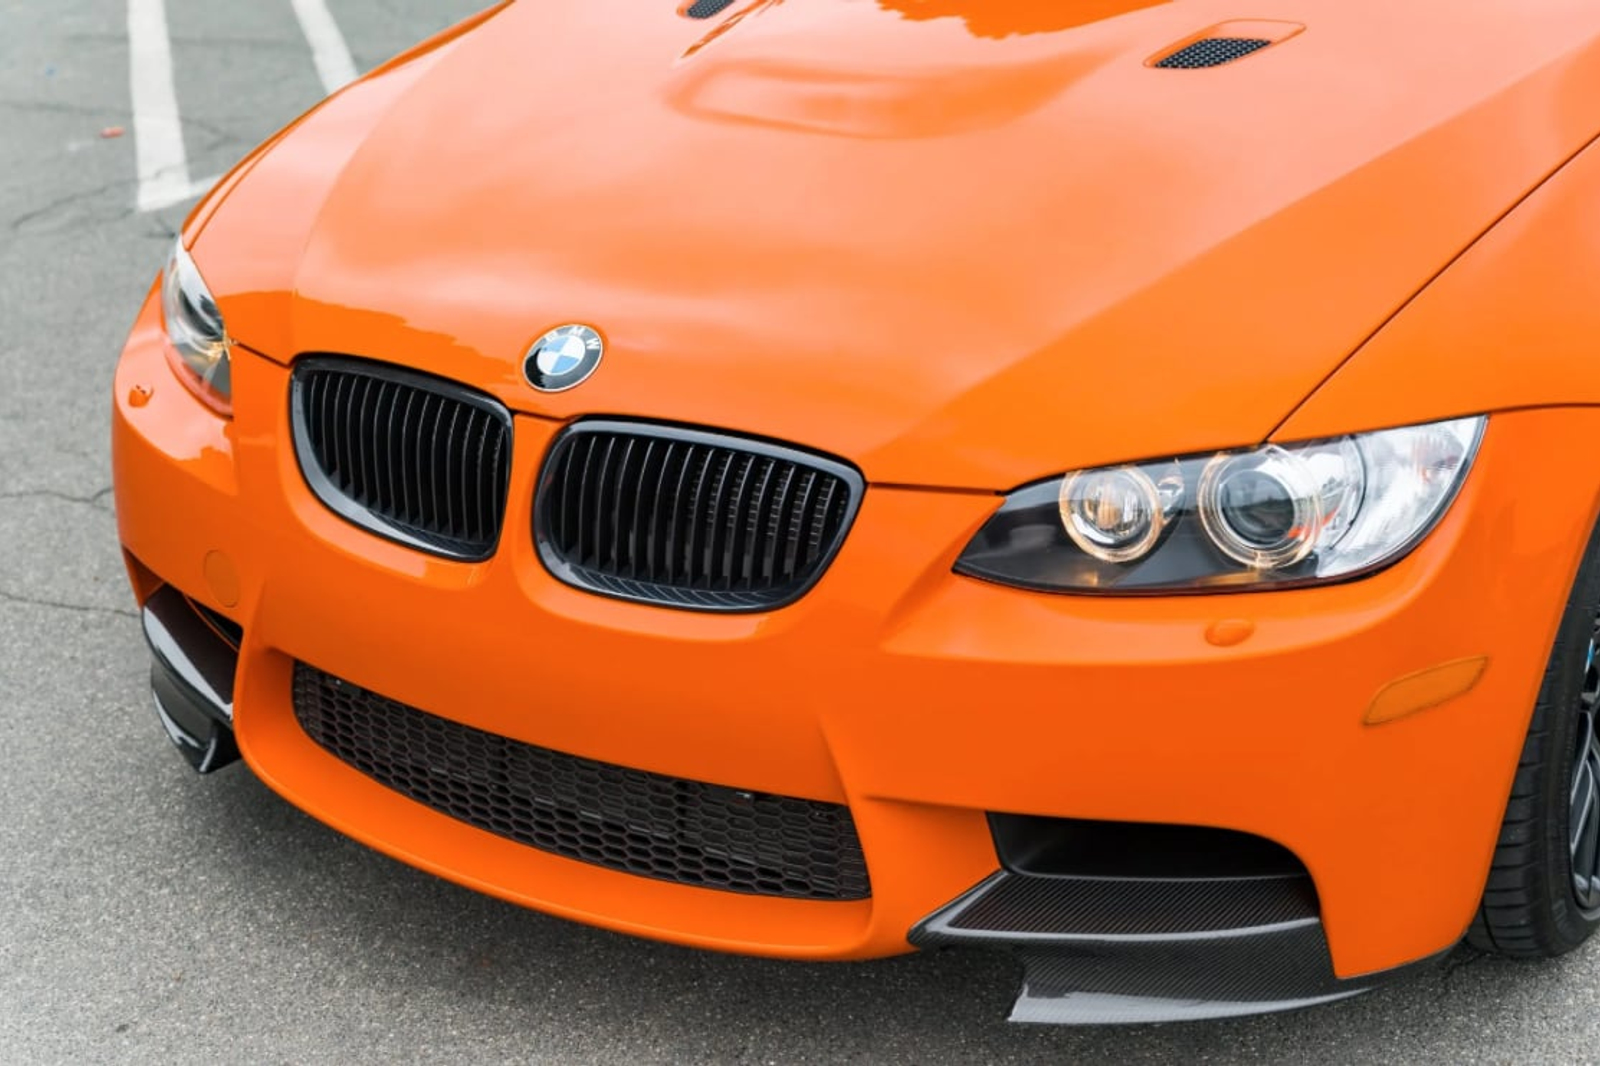 sports cars, special editions, for sale, rare bmw m3 lime rock park edition is a collector's dream